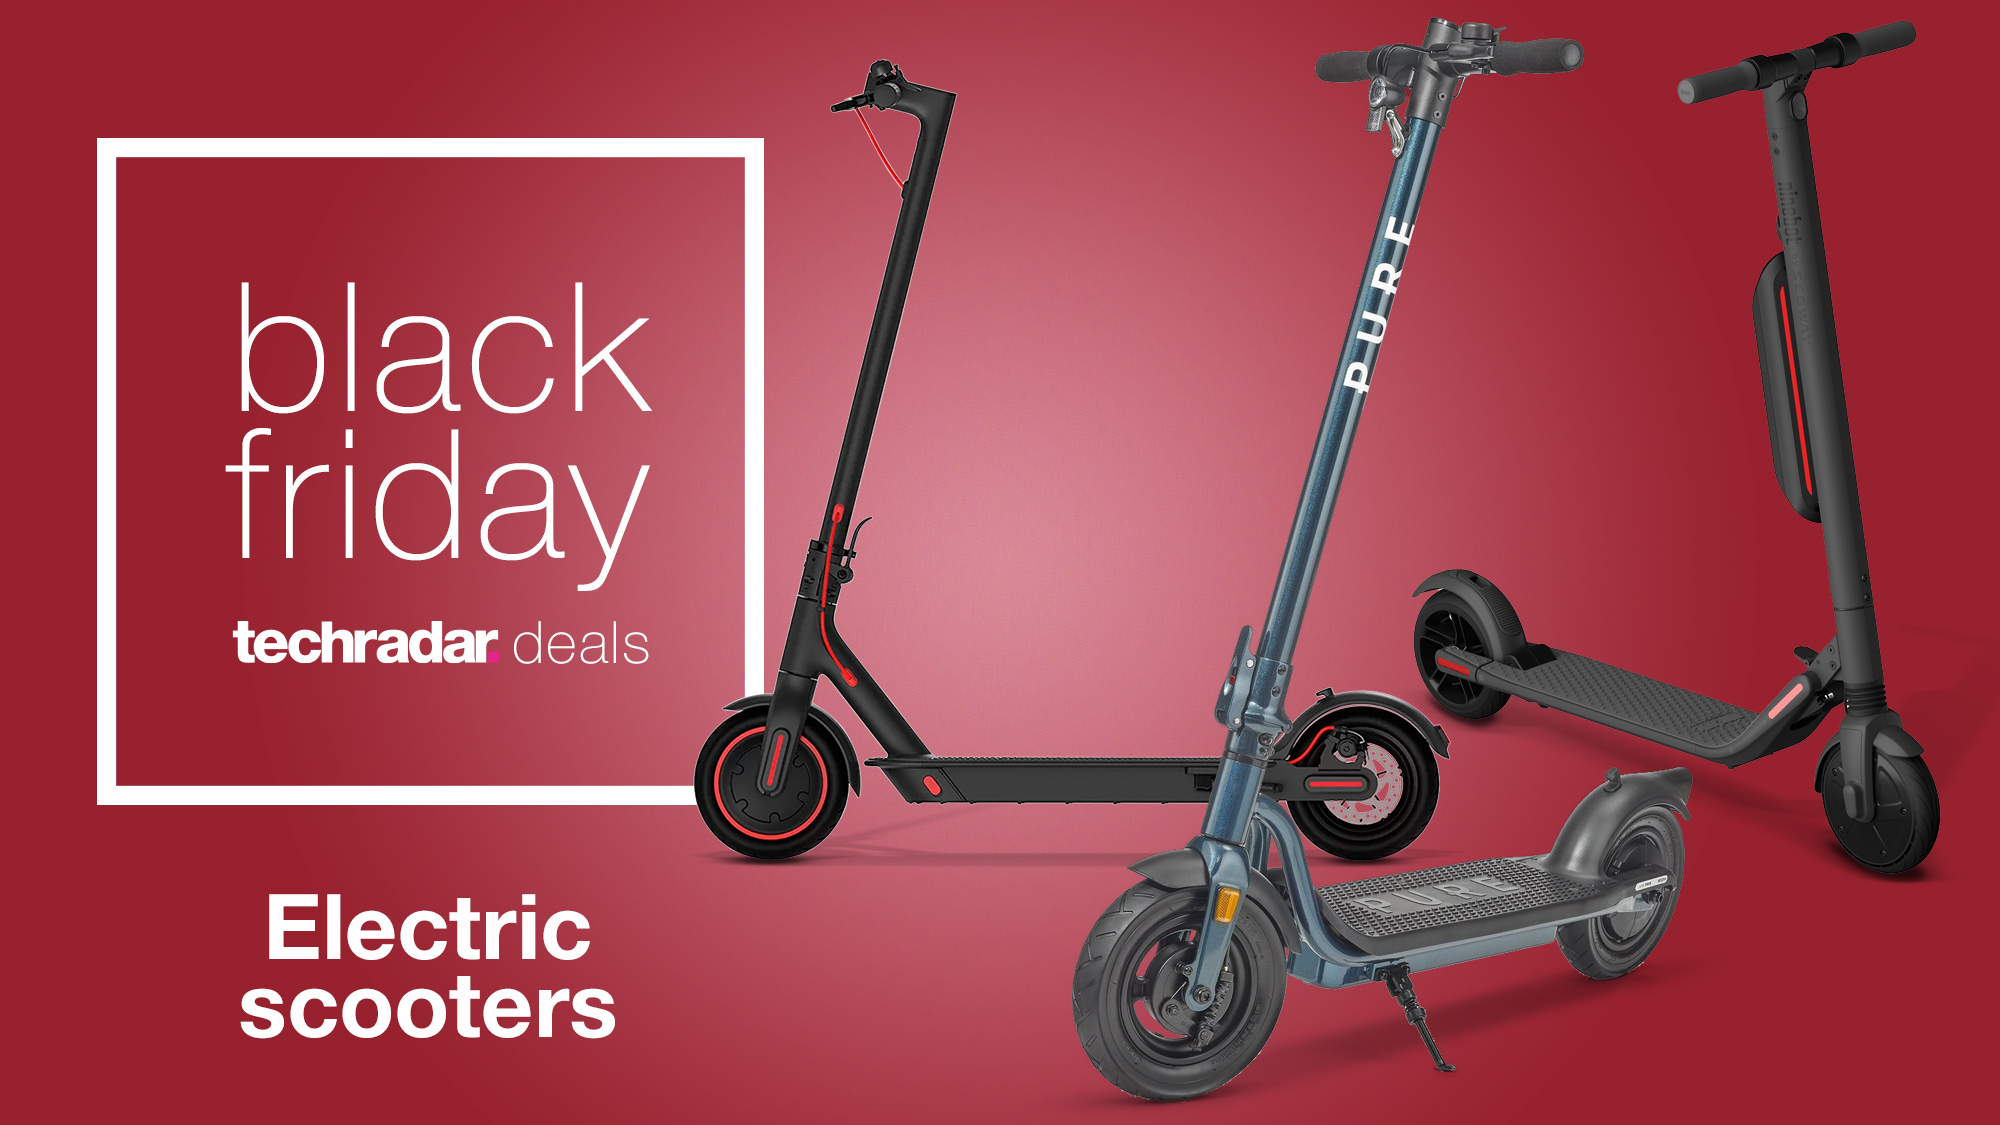 Black Friday electric scooter deals